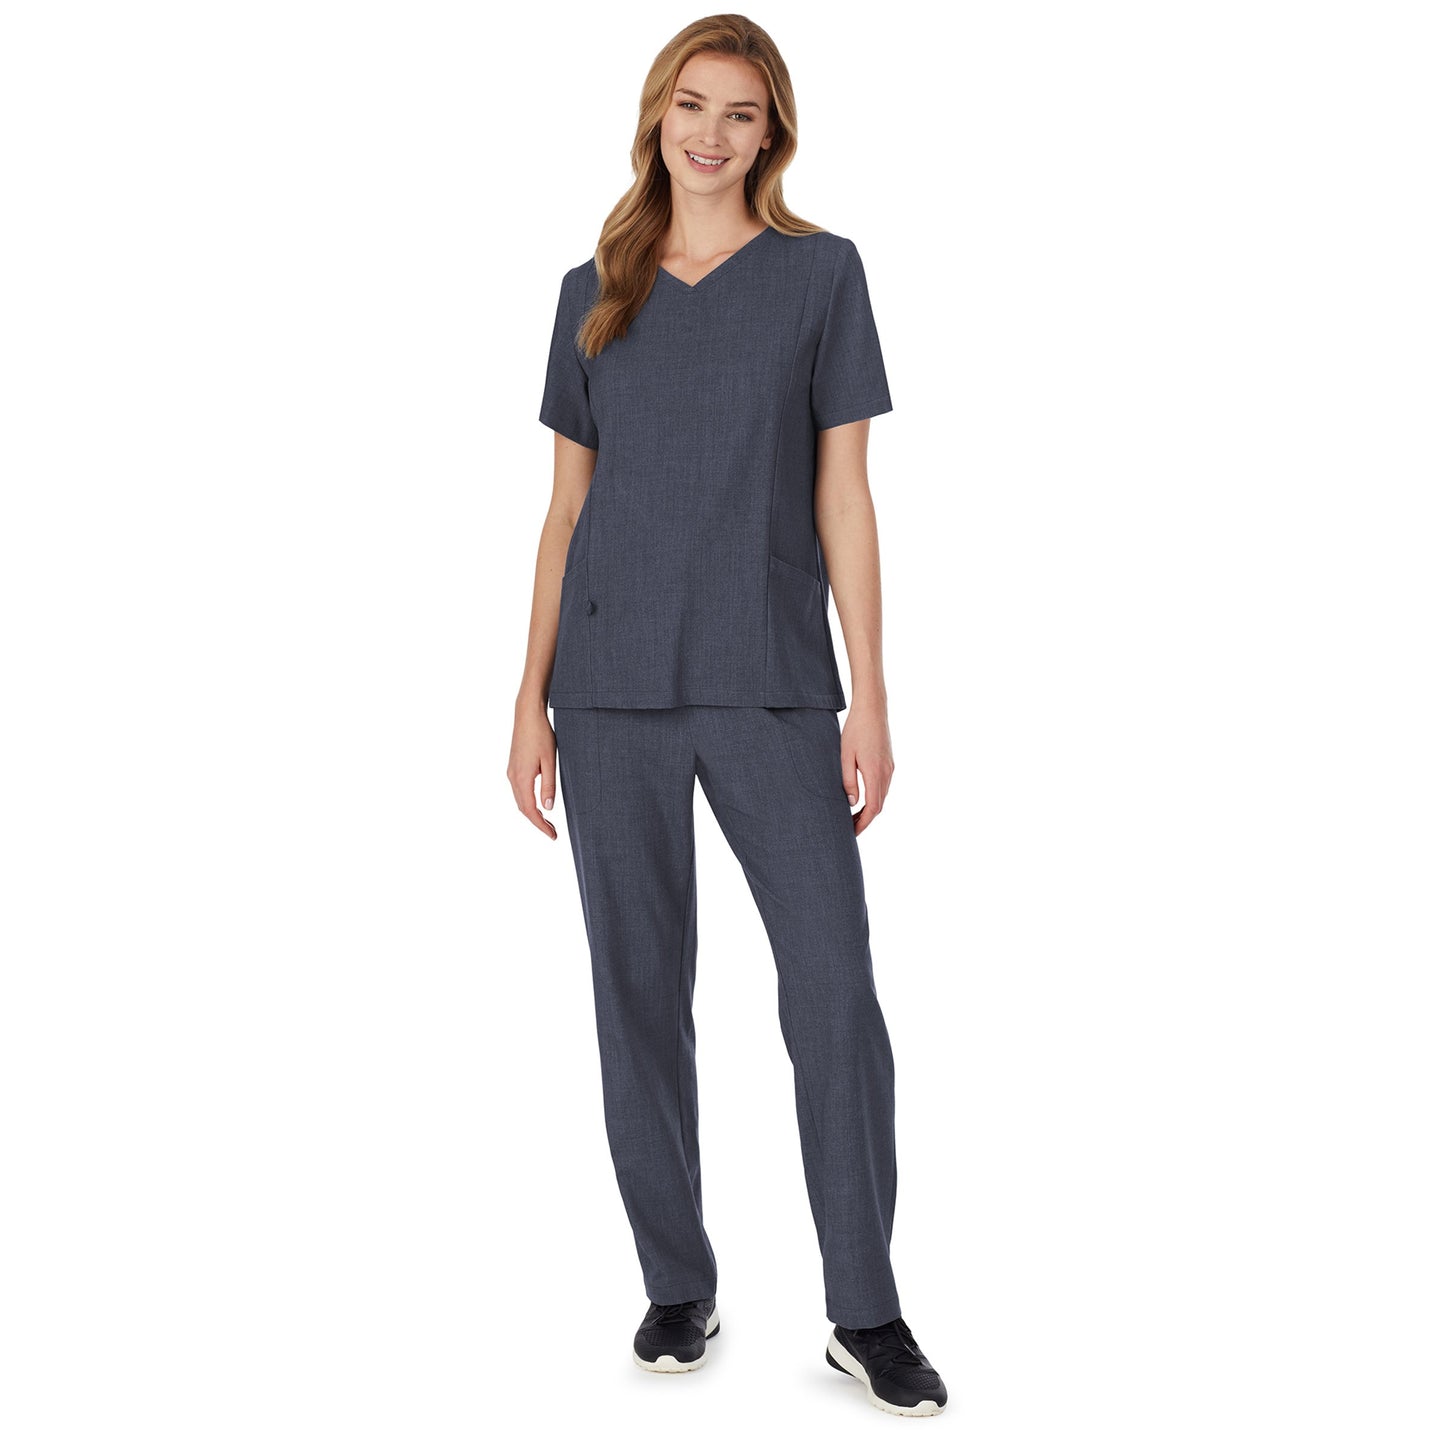 Navy Heather;A lady wearing navy heather scrub v-neck top with side pockets petite.